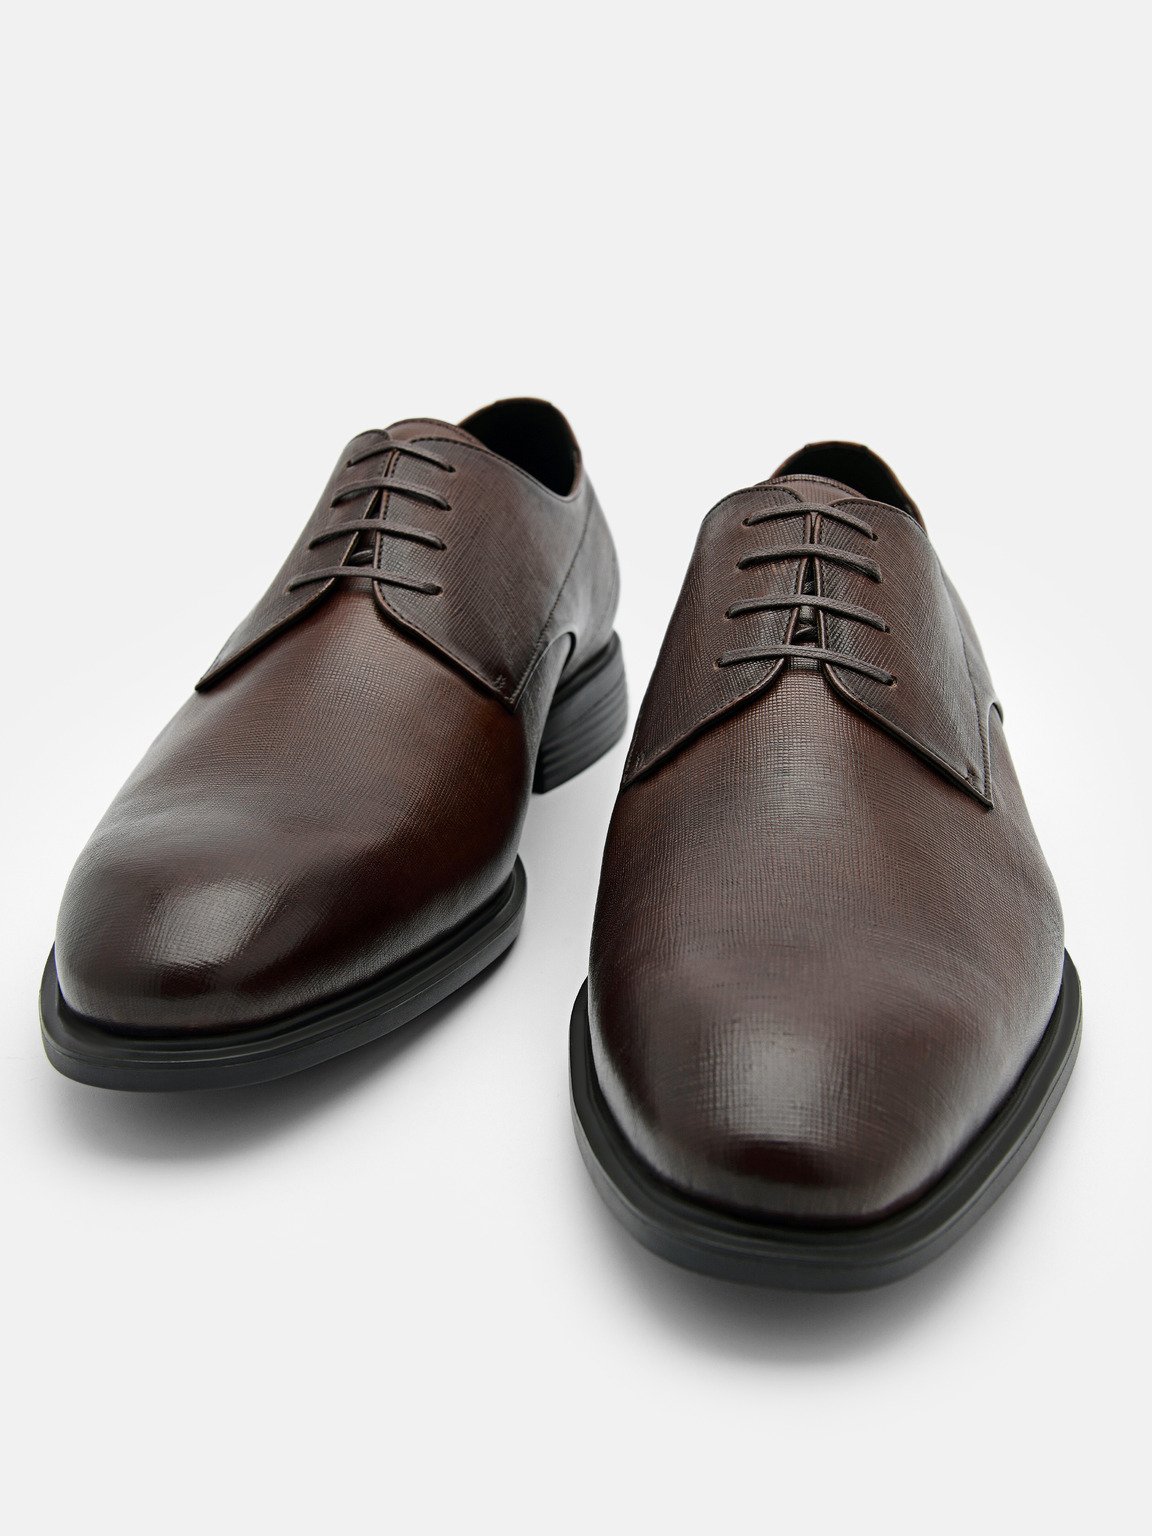 Altitude Lightweight Leather Derby Shoes, Brown